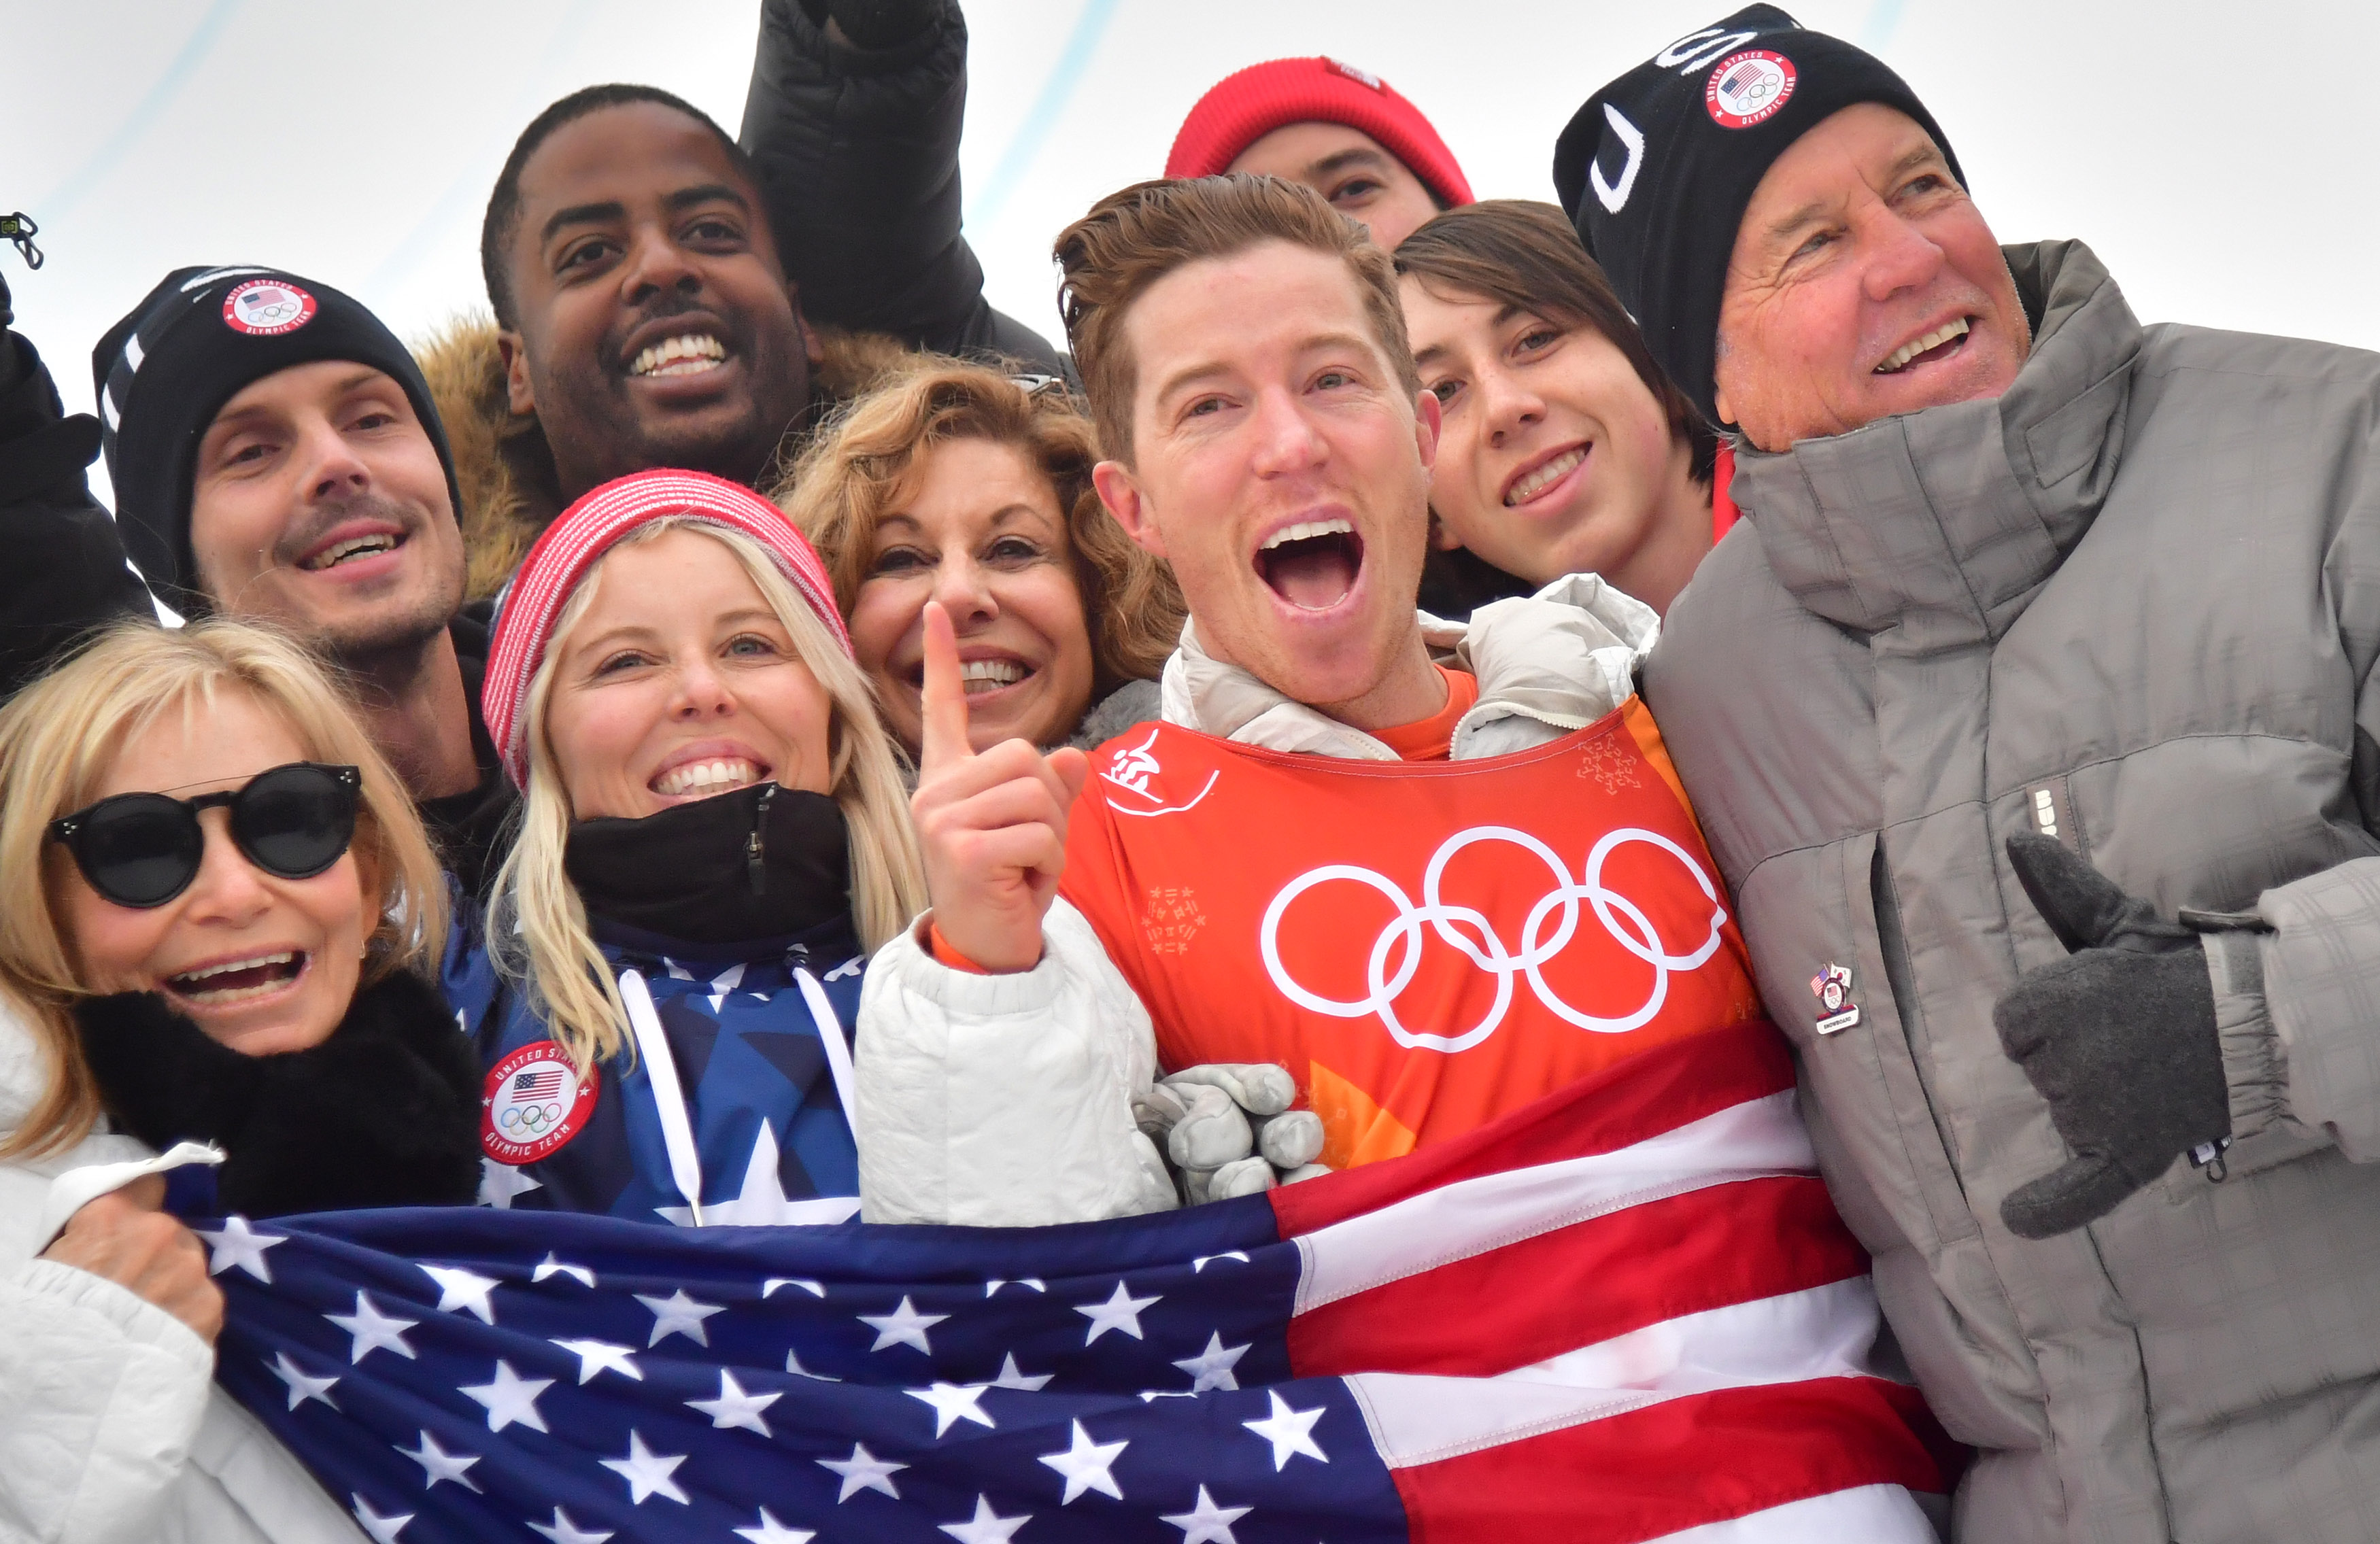 Does Shaun White Have Kids? Meet Snowboarder's Family